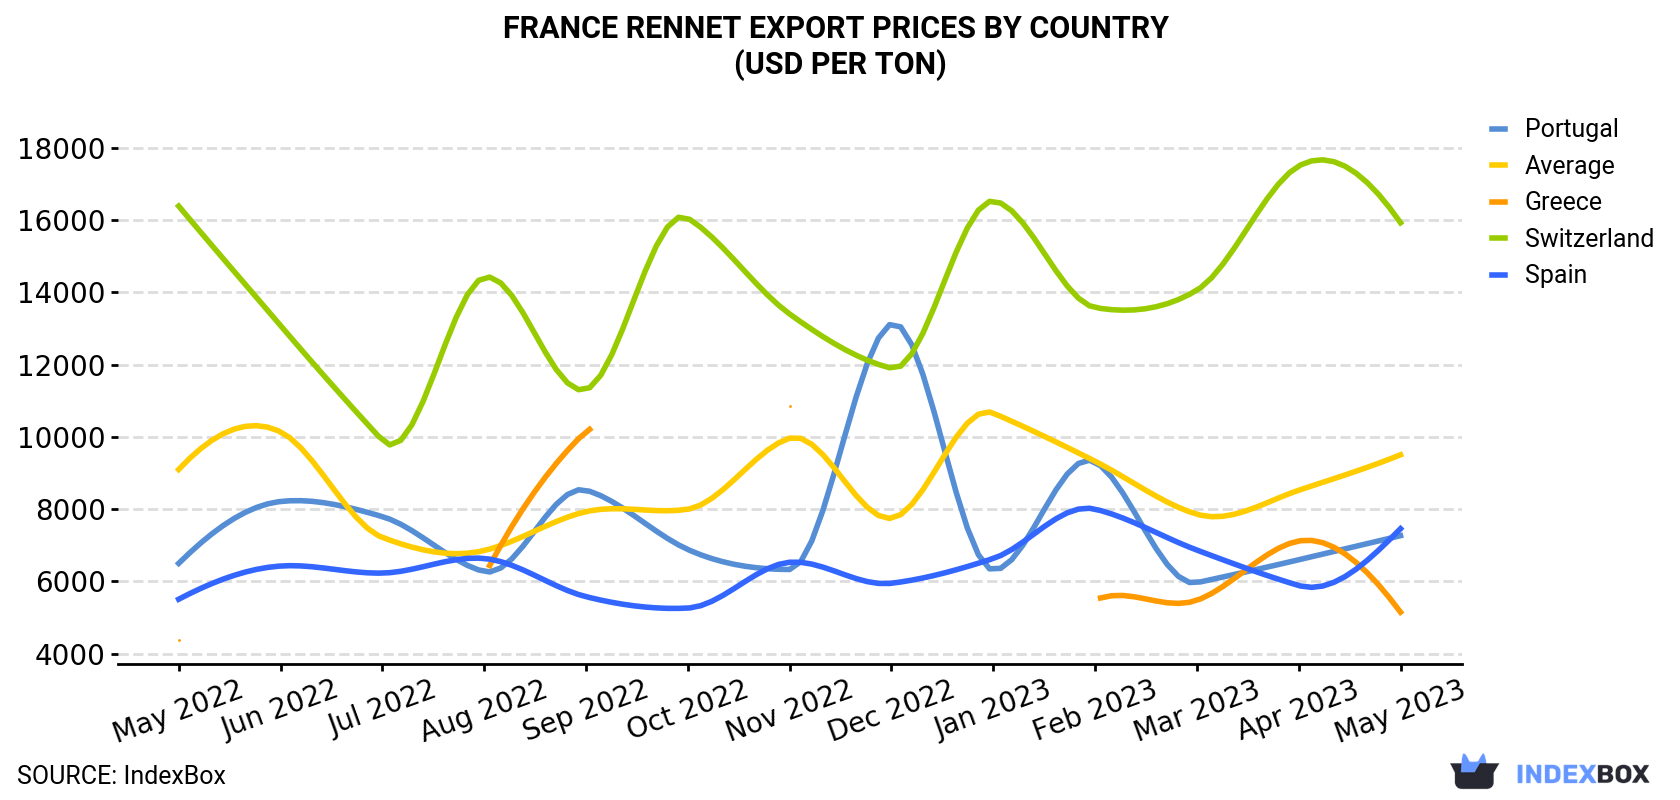 France Rennet Export Prices By Country (USD Per Ton)